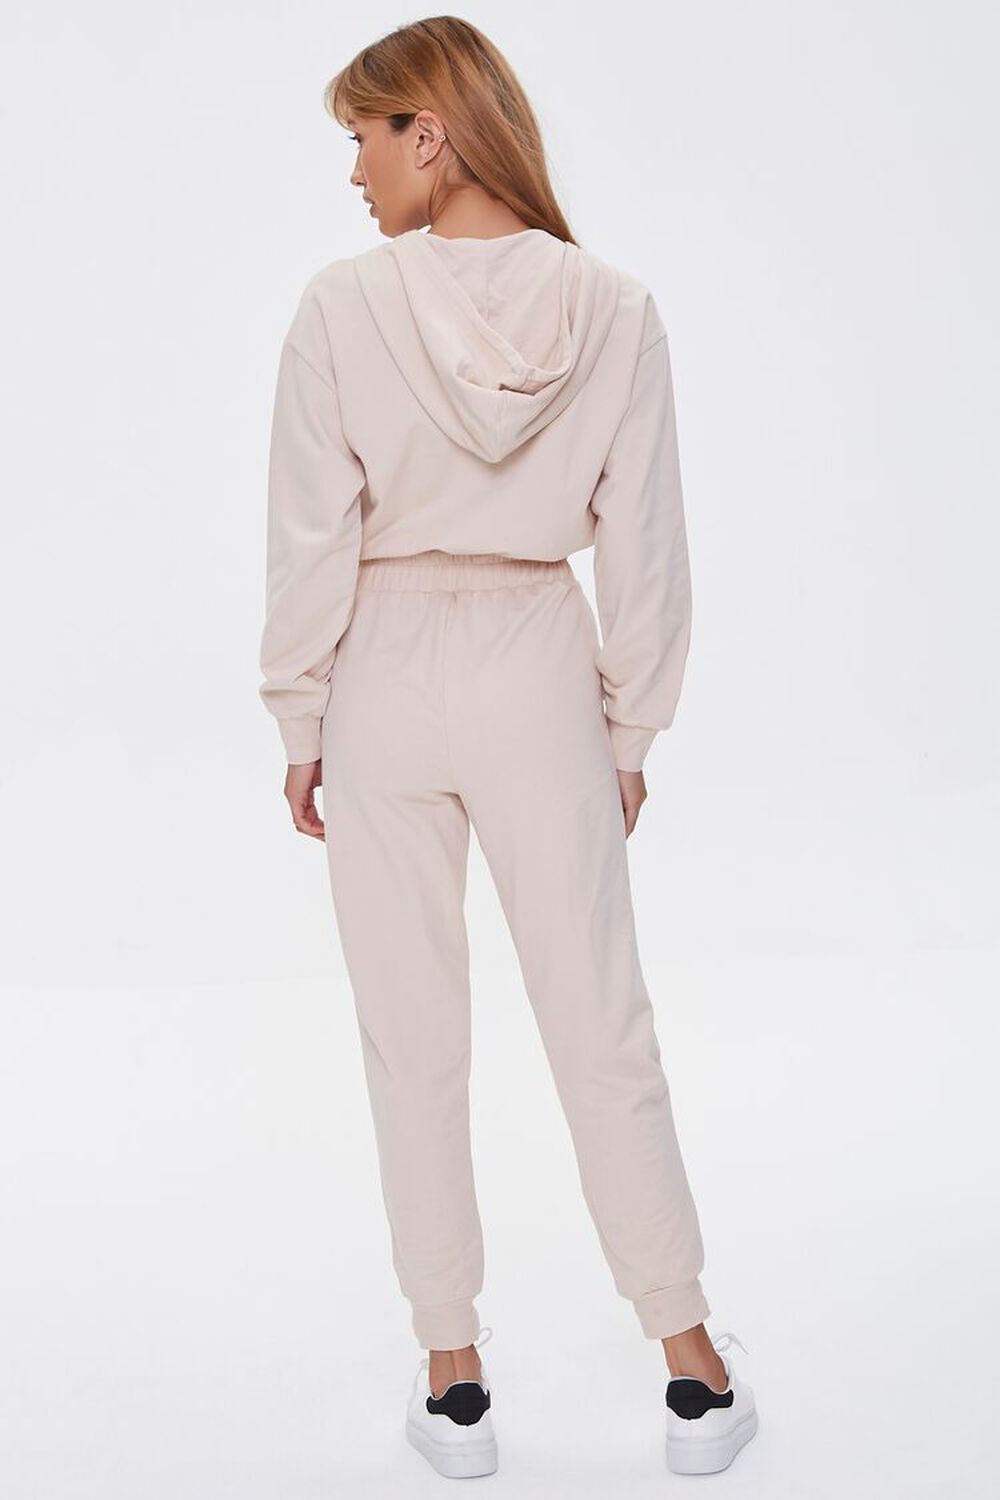 SAND Hooded French Terry Jumpsuit, image 3